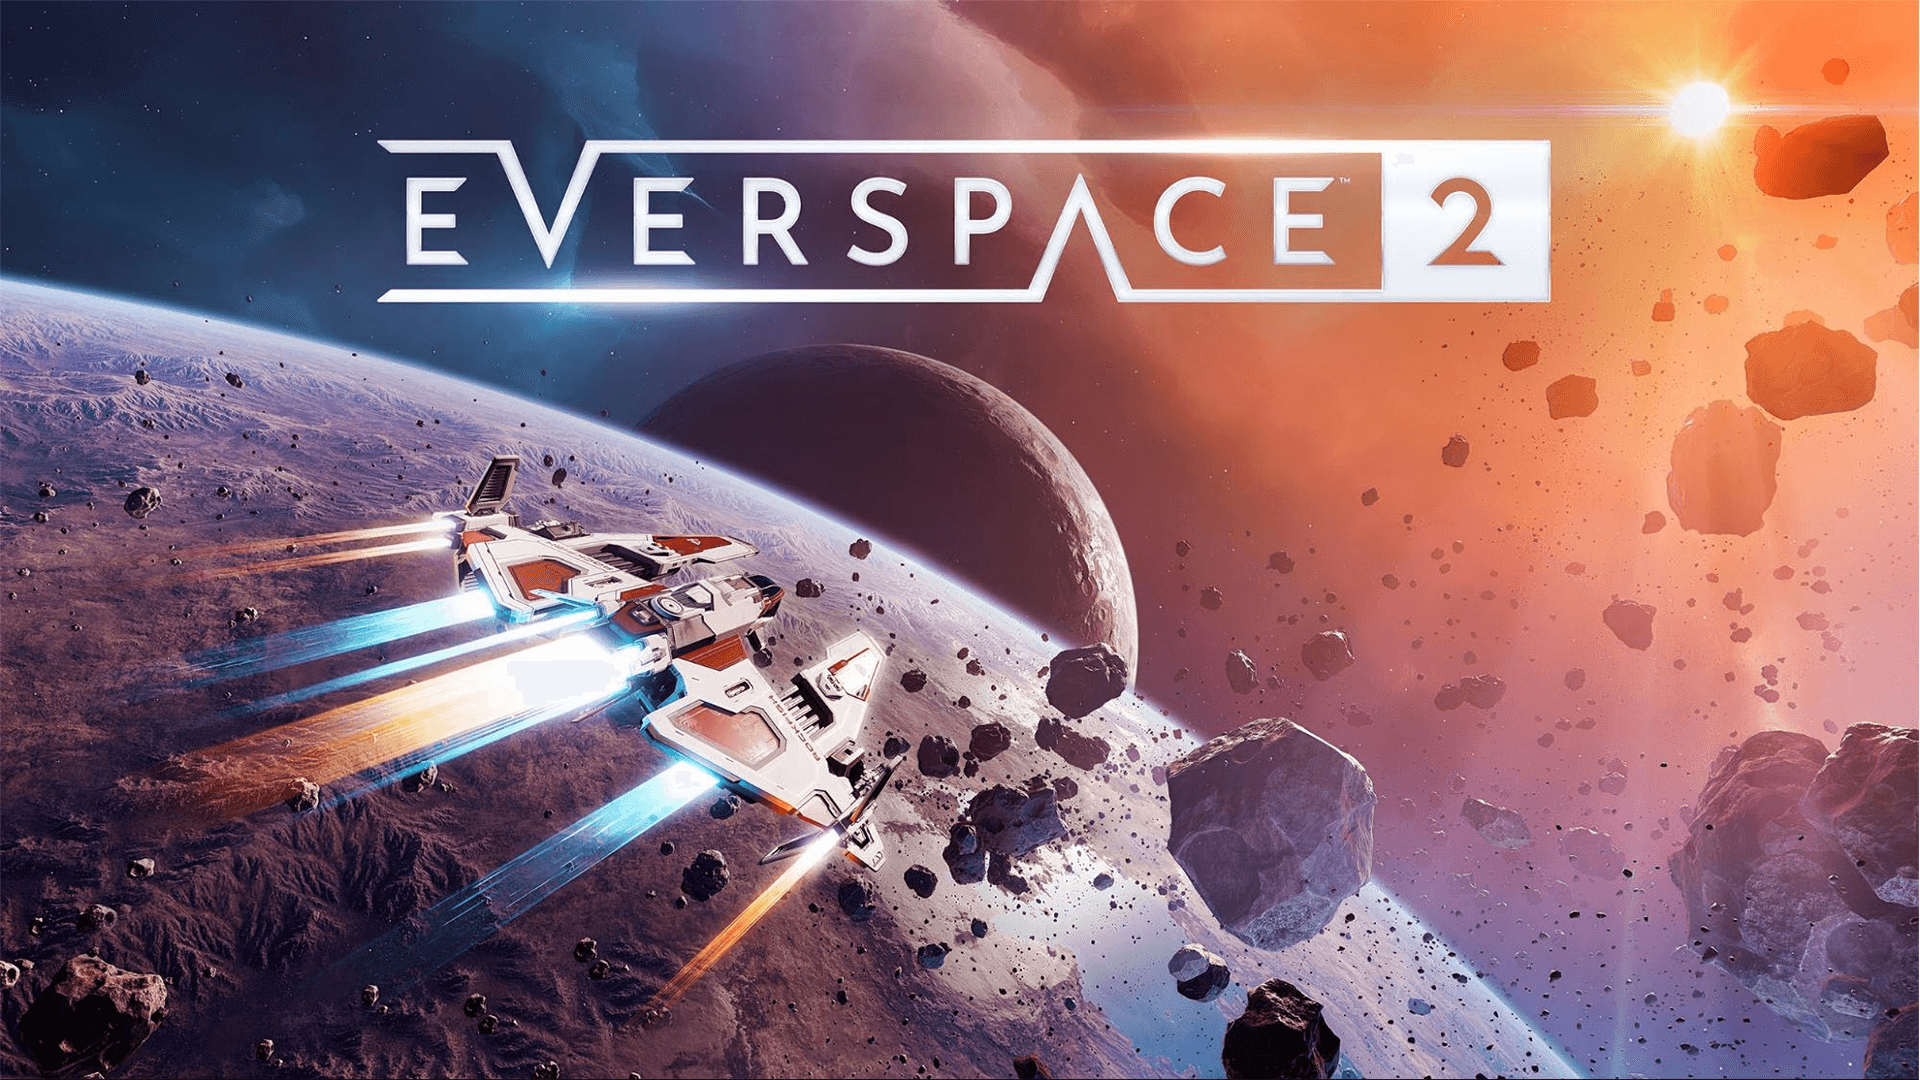 Everspace 2 Early Access: Now Available on Steam!